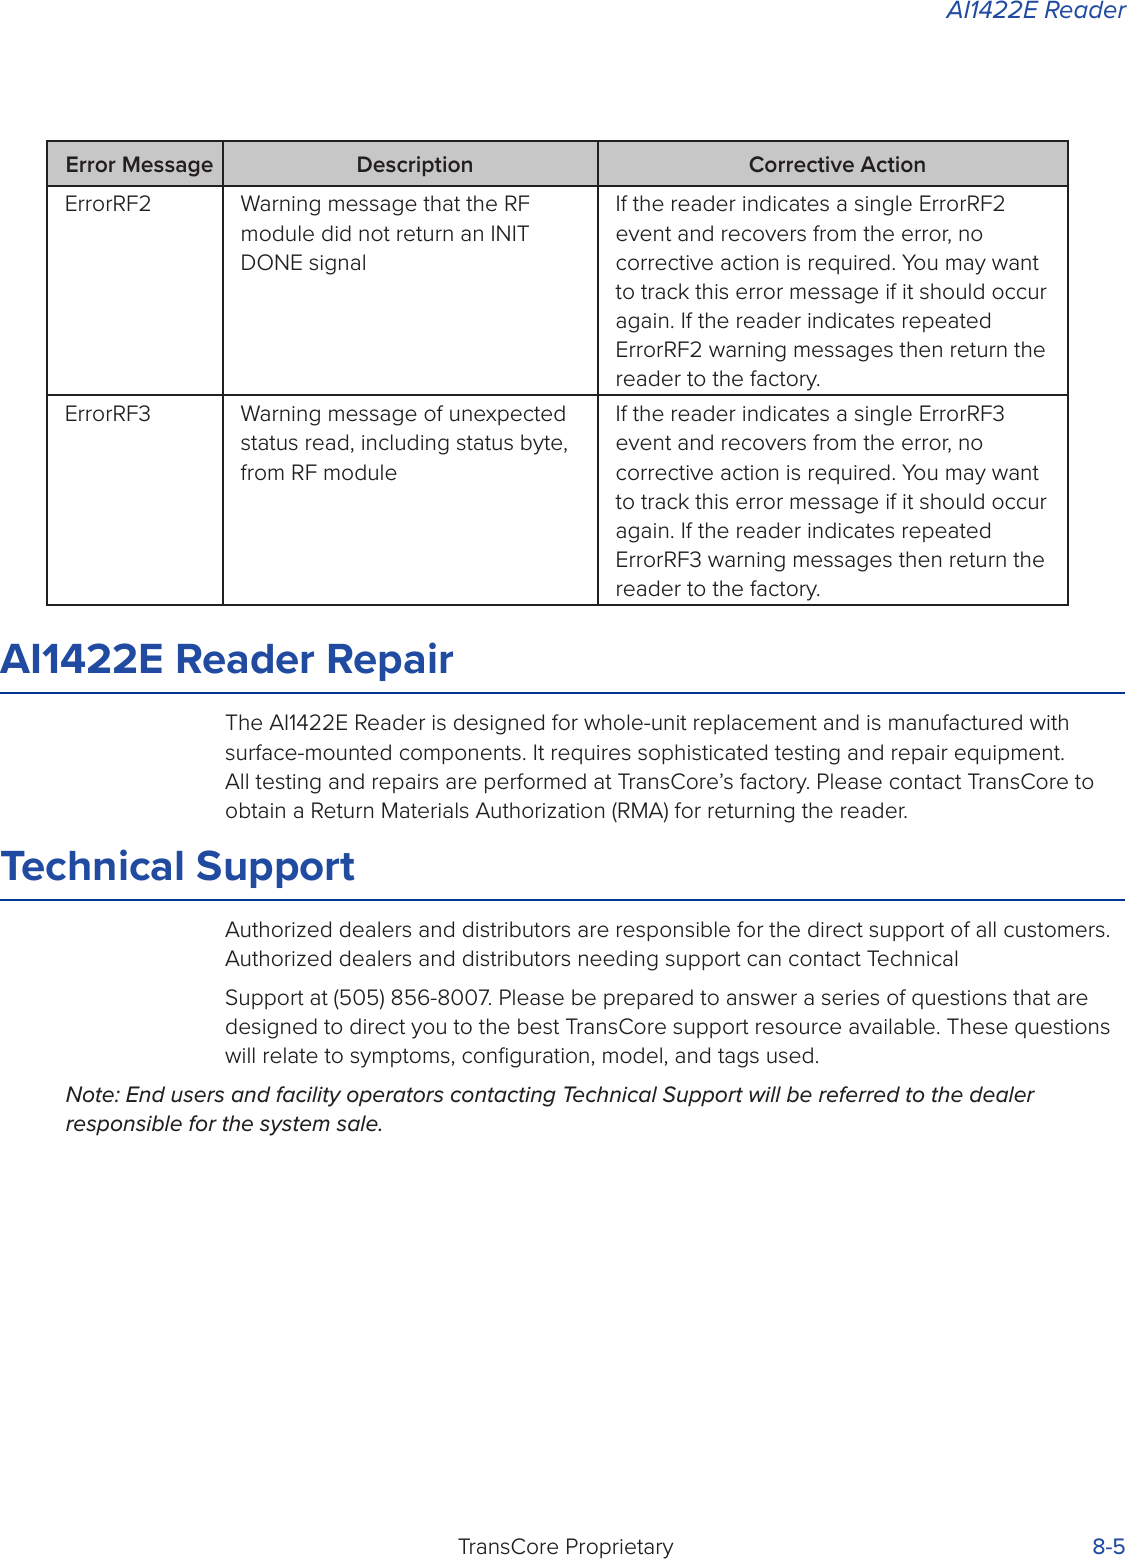 AI1422E ReaderTransCore Proprietary 8-5AI1422E Reader RepairThe AI1422E Reader is designed for whole-unit replacement and is manufactured with surface-mounted components. It requires sophisticated testing and repair equipment. All testing and repairs are performed at TransCore’s factory. Please contact TransCore to obtain a Return Materials Authorization (RMA) for returning the reader.Technical SupportAuthorized dealers and distributors are responsible for the direct support of all customers. Authorized dealers and distributors needing support can contact TechnicalSupport at (505) 856-8007. Please be prepared to answer a series of questions that are designed to direct you to the best TransCore support resource available. These questions will relate to symptoms, conﬁguration, model, and tags used.Note: End users and facility operators contacting Technical Support will be referred to the dealer responsible for the system sale.Error Message Description Corrective ActionErrorRF2 Warning message that the RF module did not return an INIT DONE signalIf the reader indicates a single ErrorRF2 event and recovers from the error, no corrective action is required. You may want to track this error message if it should occur again. If the reader indicates repeated ErrorRF2 warning messages then return the reader to the factory.ErrorRF3 Warning message of unexpected status read, including status byte, from RF moduleIf the reader indicates a single ErrorRF3 event and recovers from the error, no corrective action is required. You may want to track this error message if it should occur again. If the reader indicates repeated ErrorRF3 warning messages then return the reader to the factory.